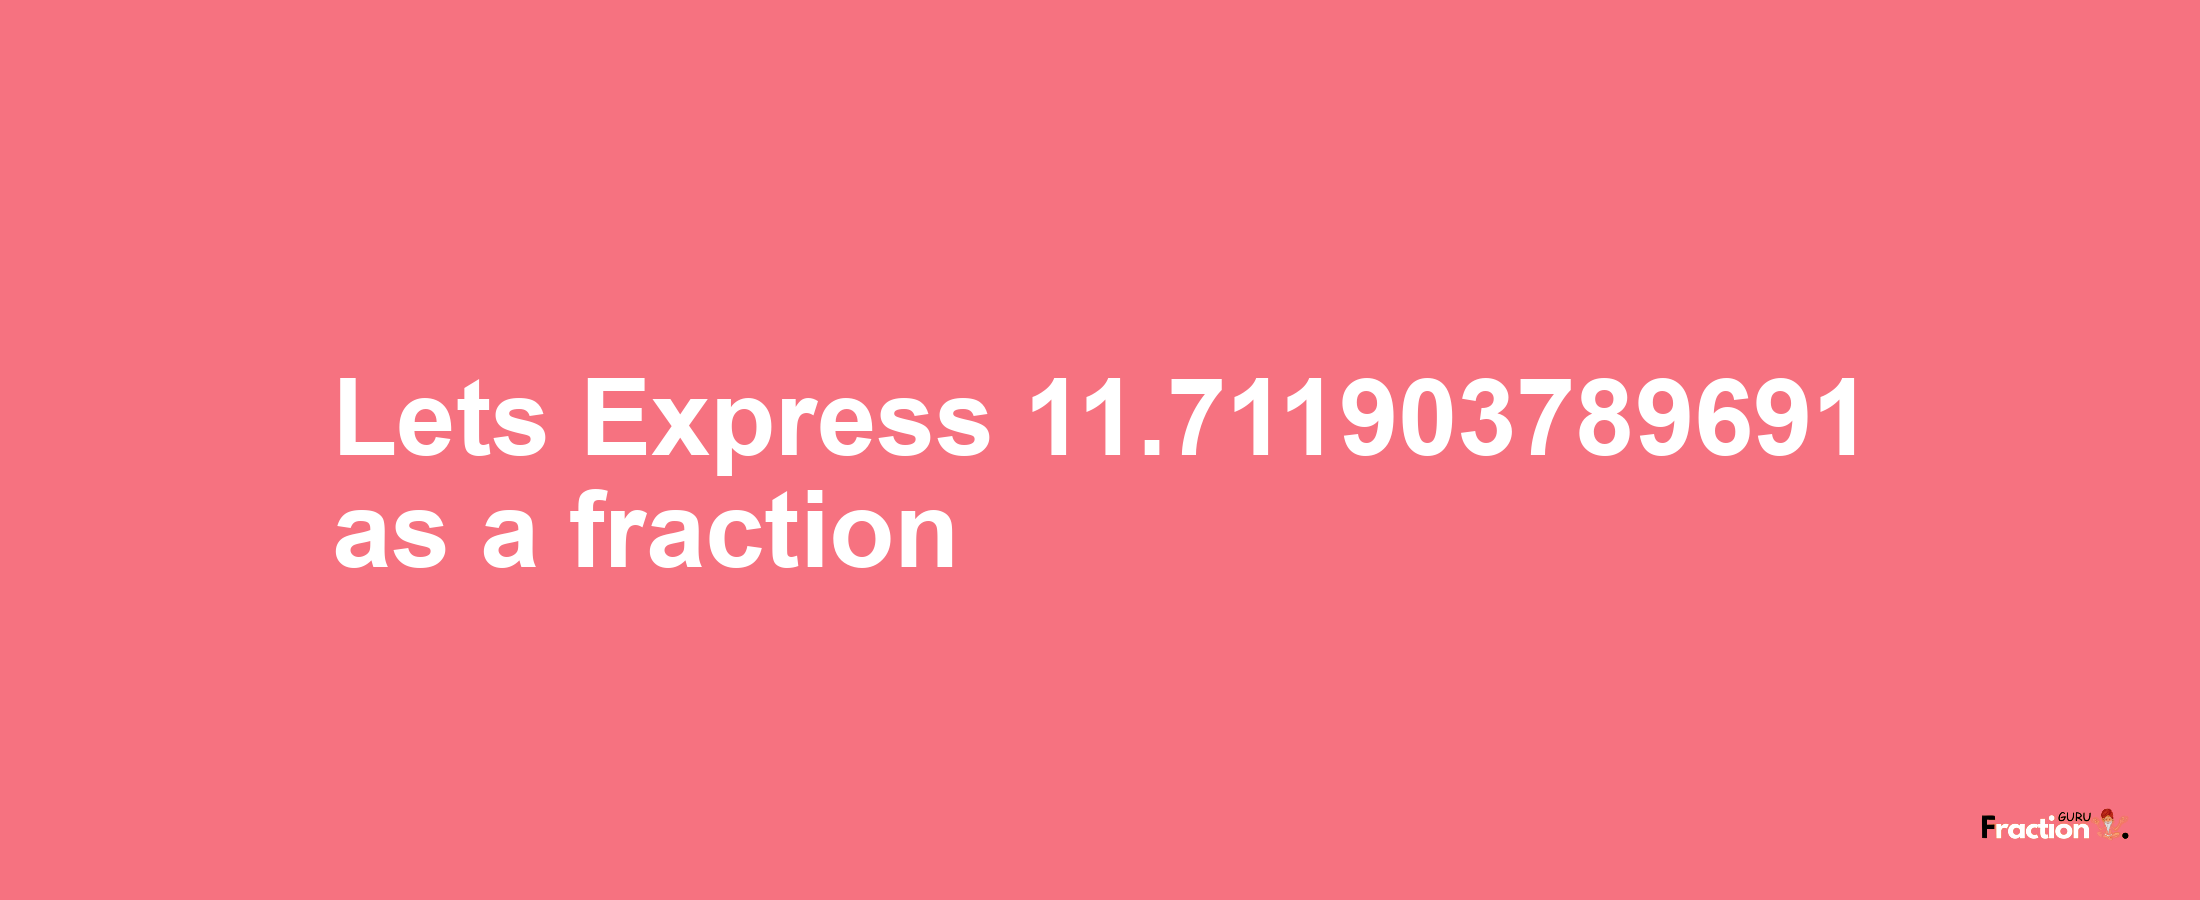 Lets Express 11.711903789691 as afraction